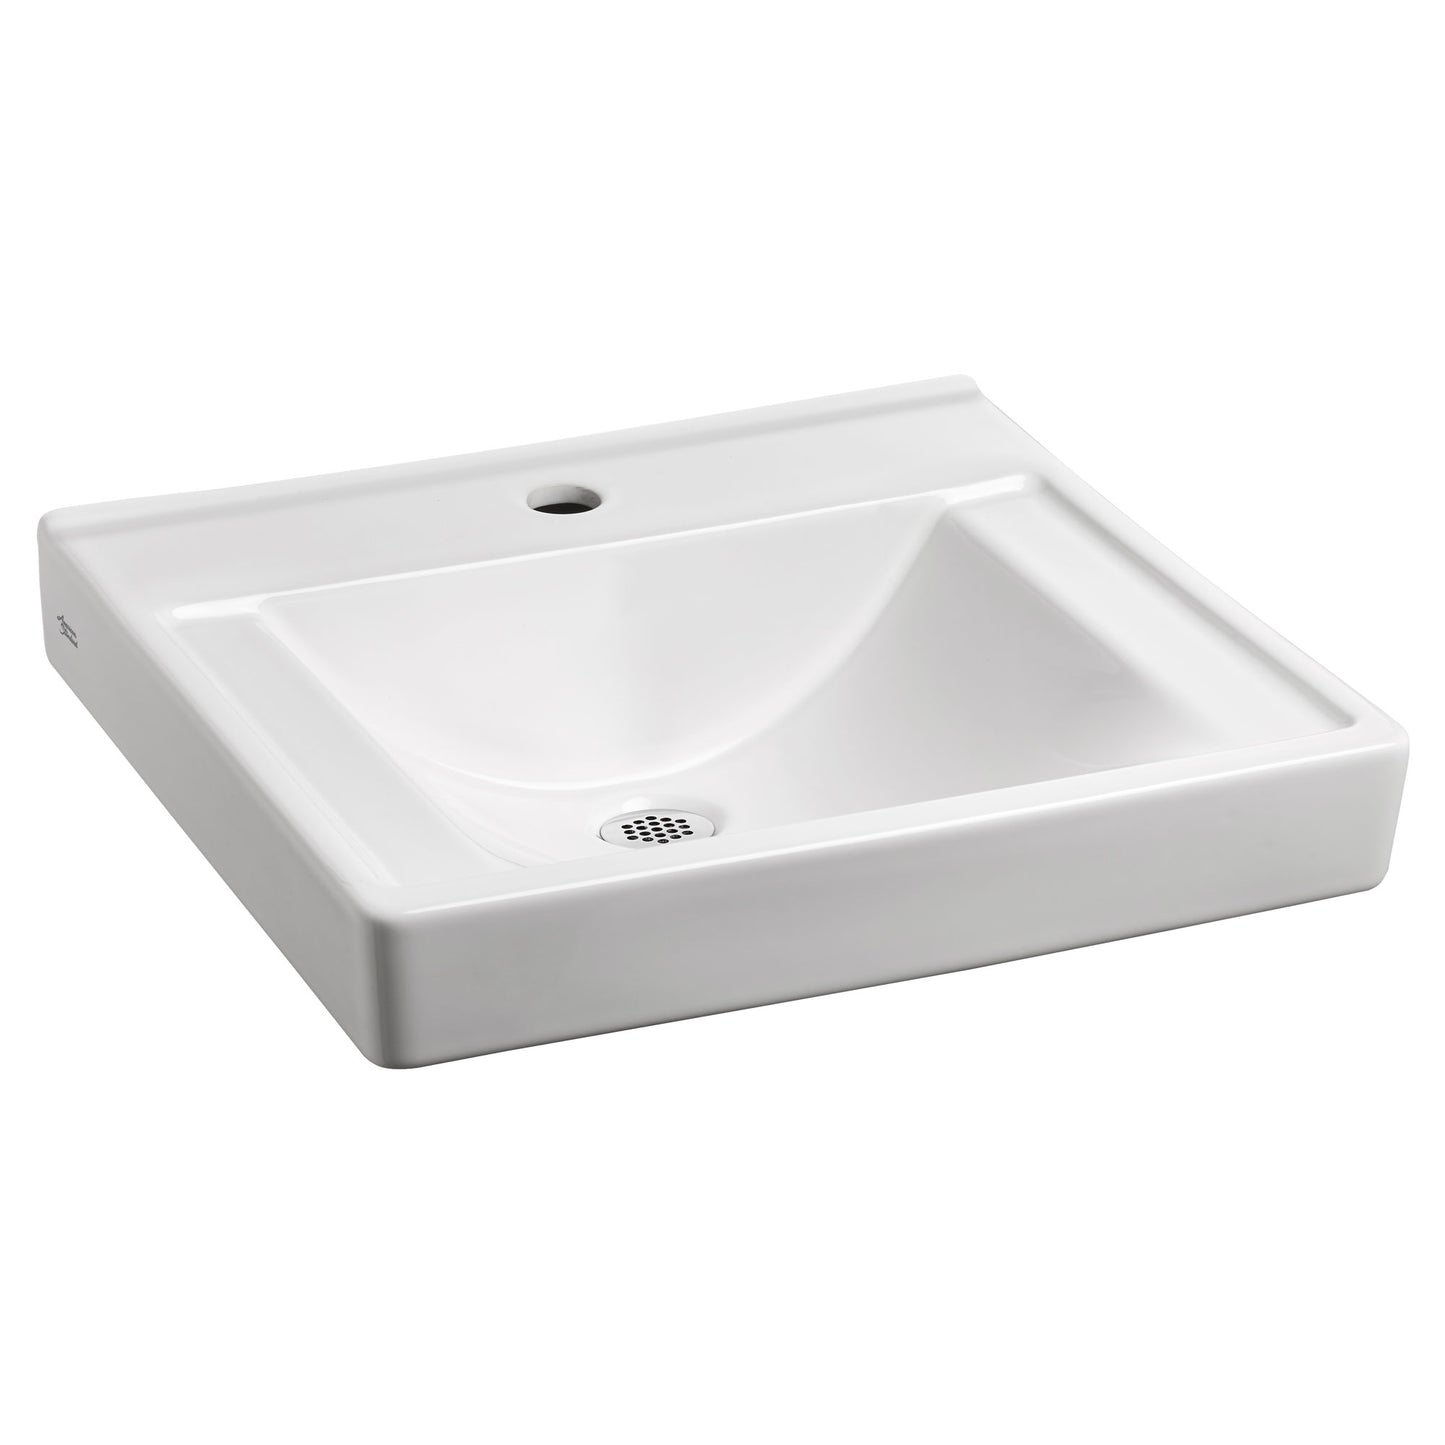 AMERICAN-STANDARD 9024901EC.020, Decorum Wall-Hung EverClean Sink Less Overflow With Center Hole Only in White